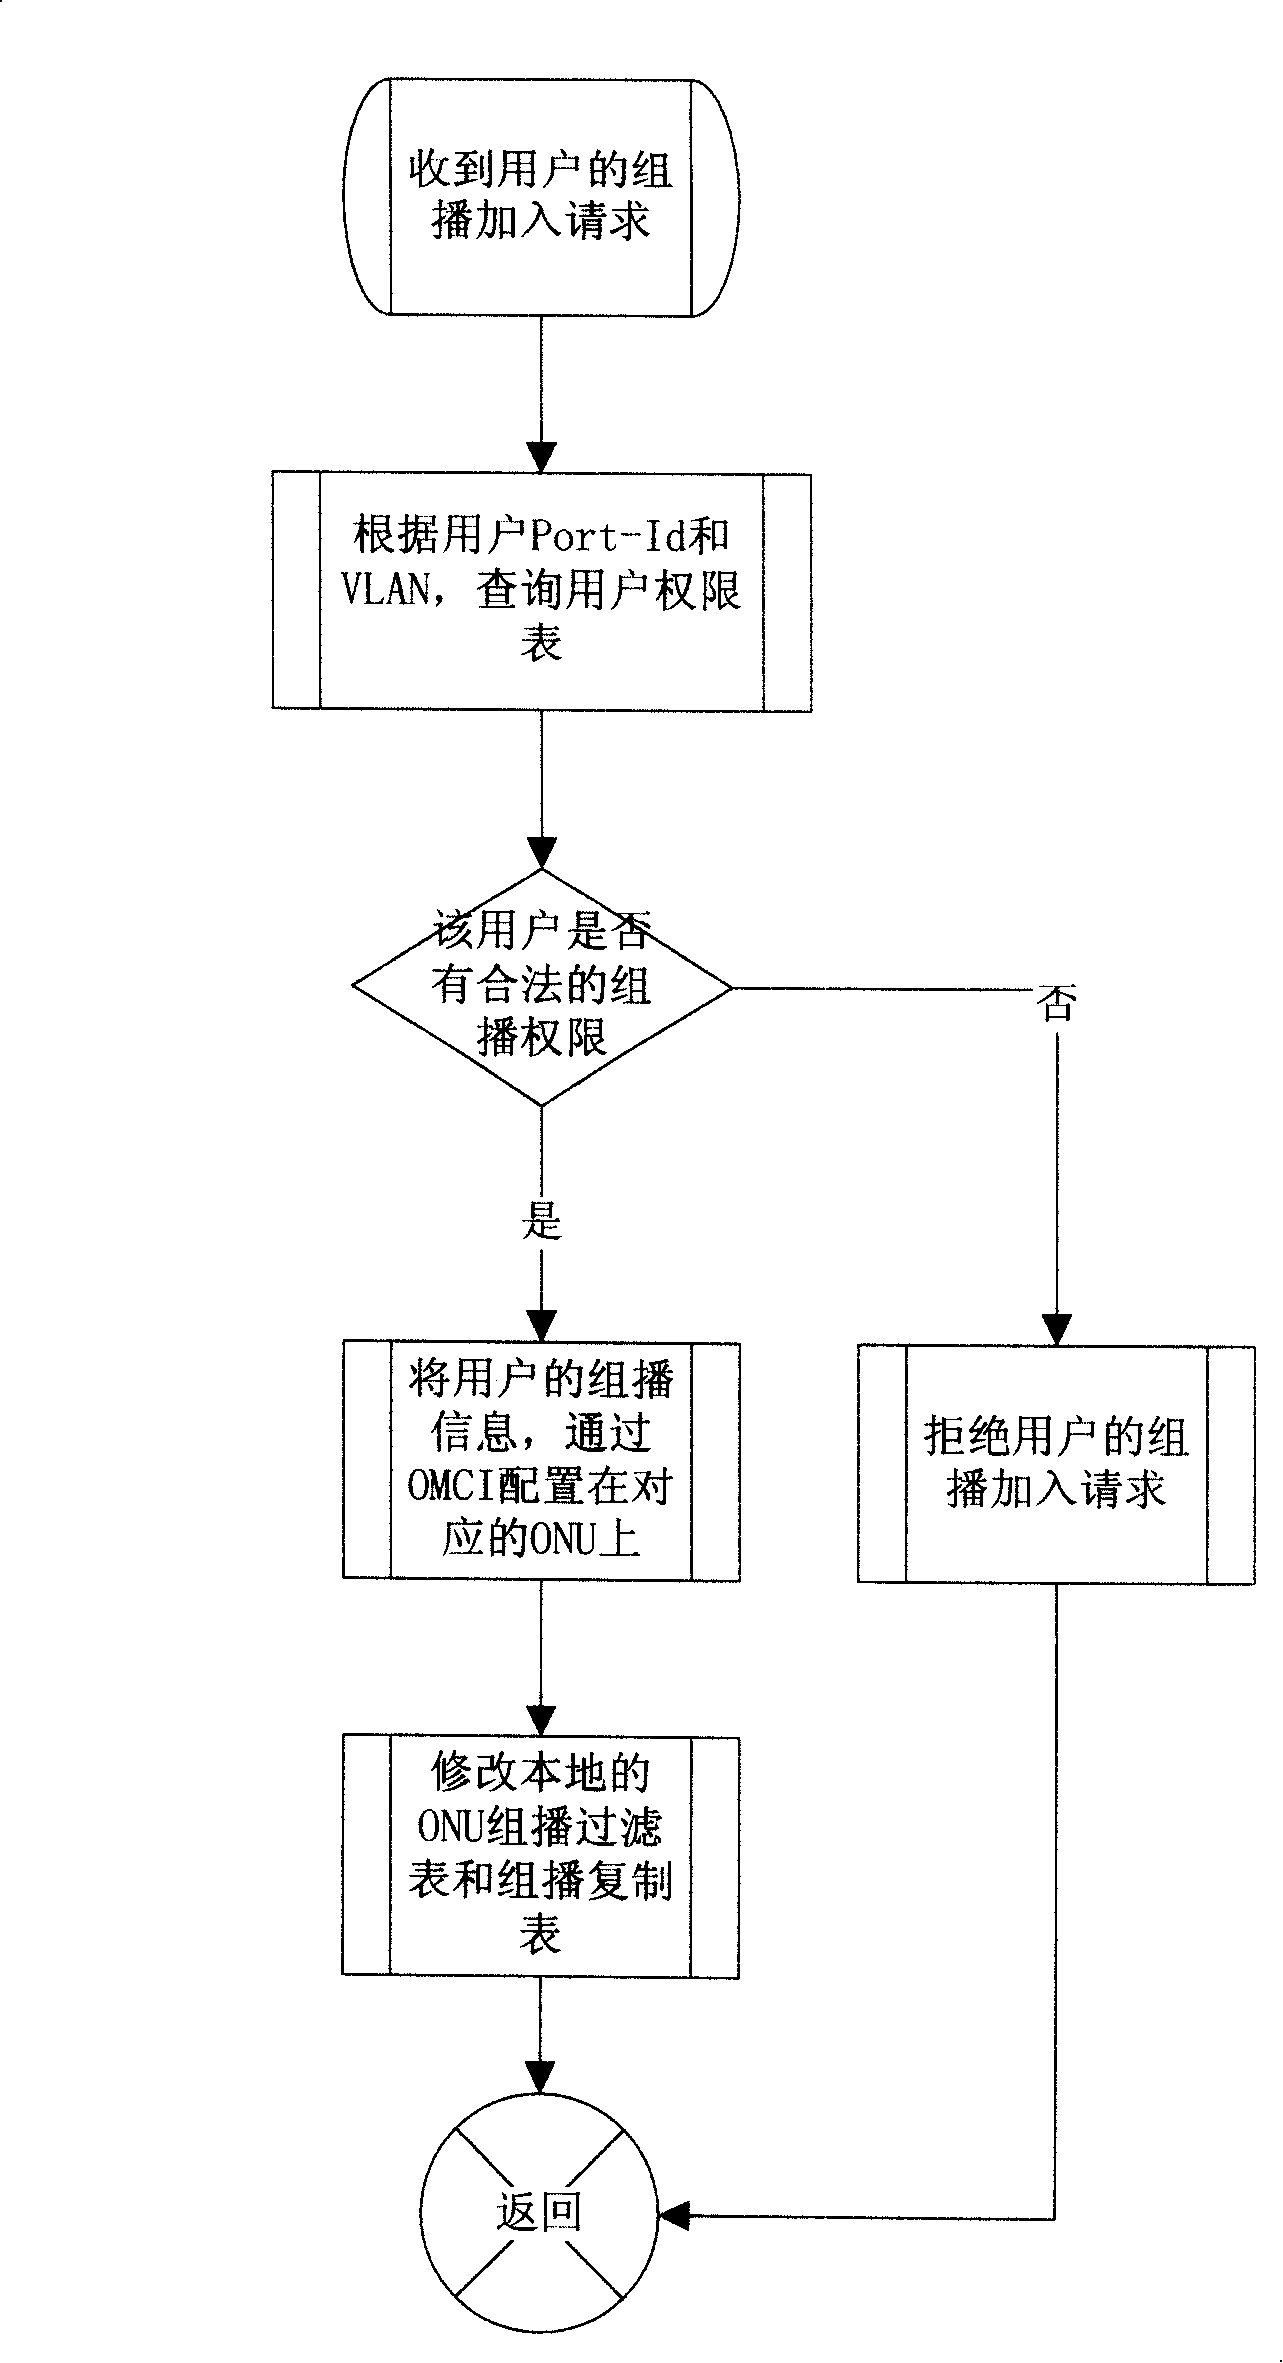 Method for realizing multicast virtual local area network registration in GPON system